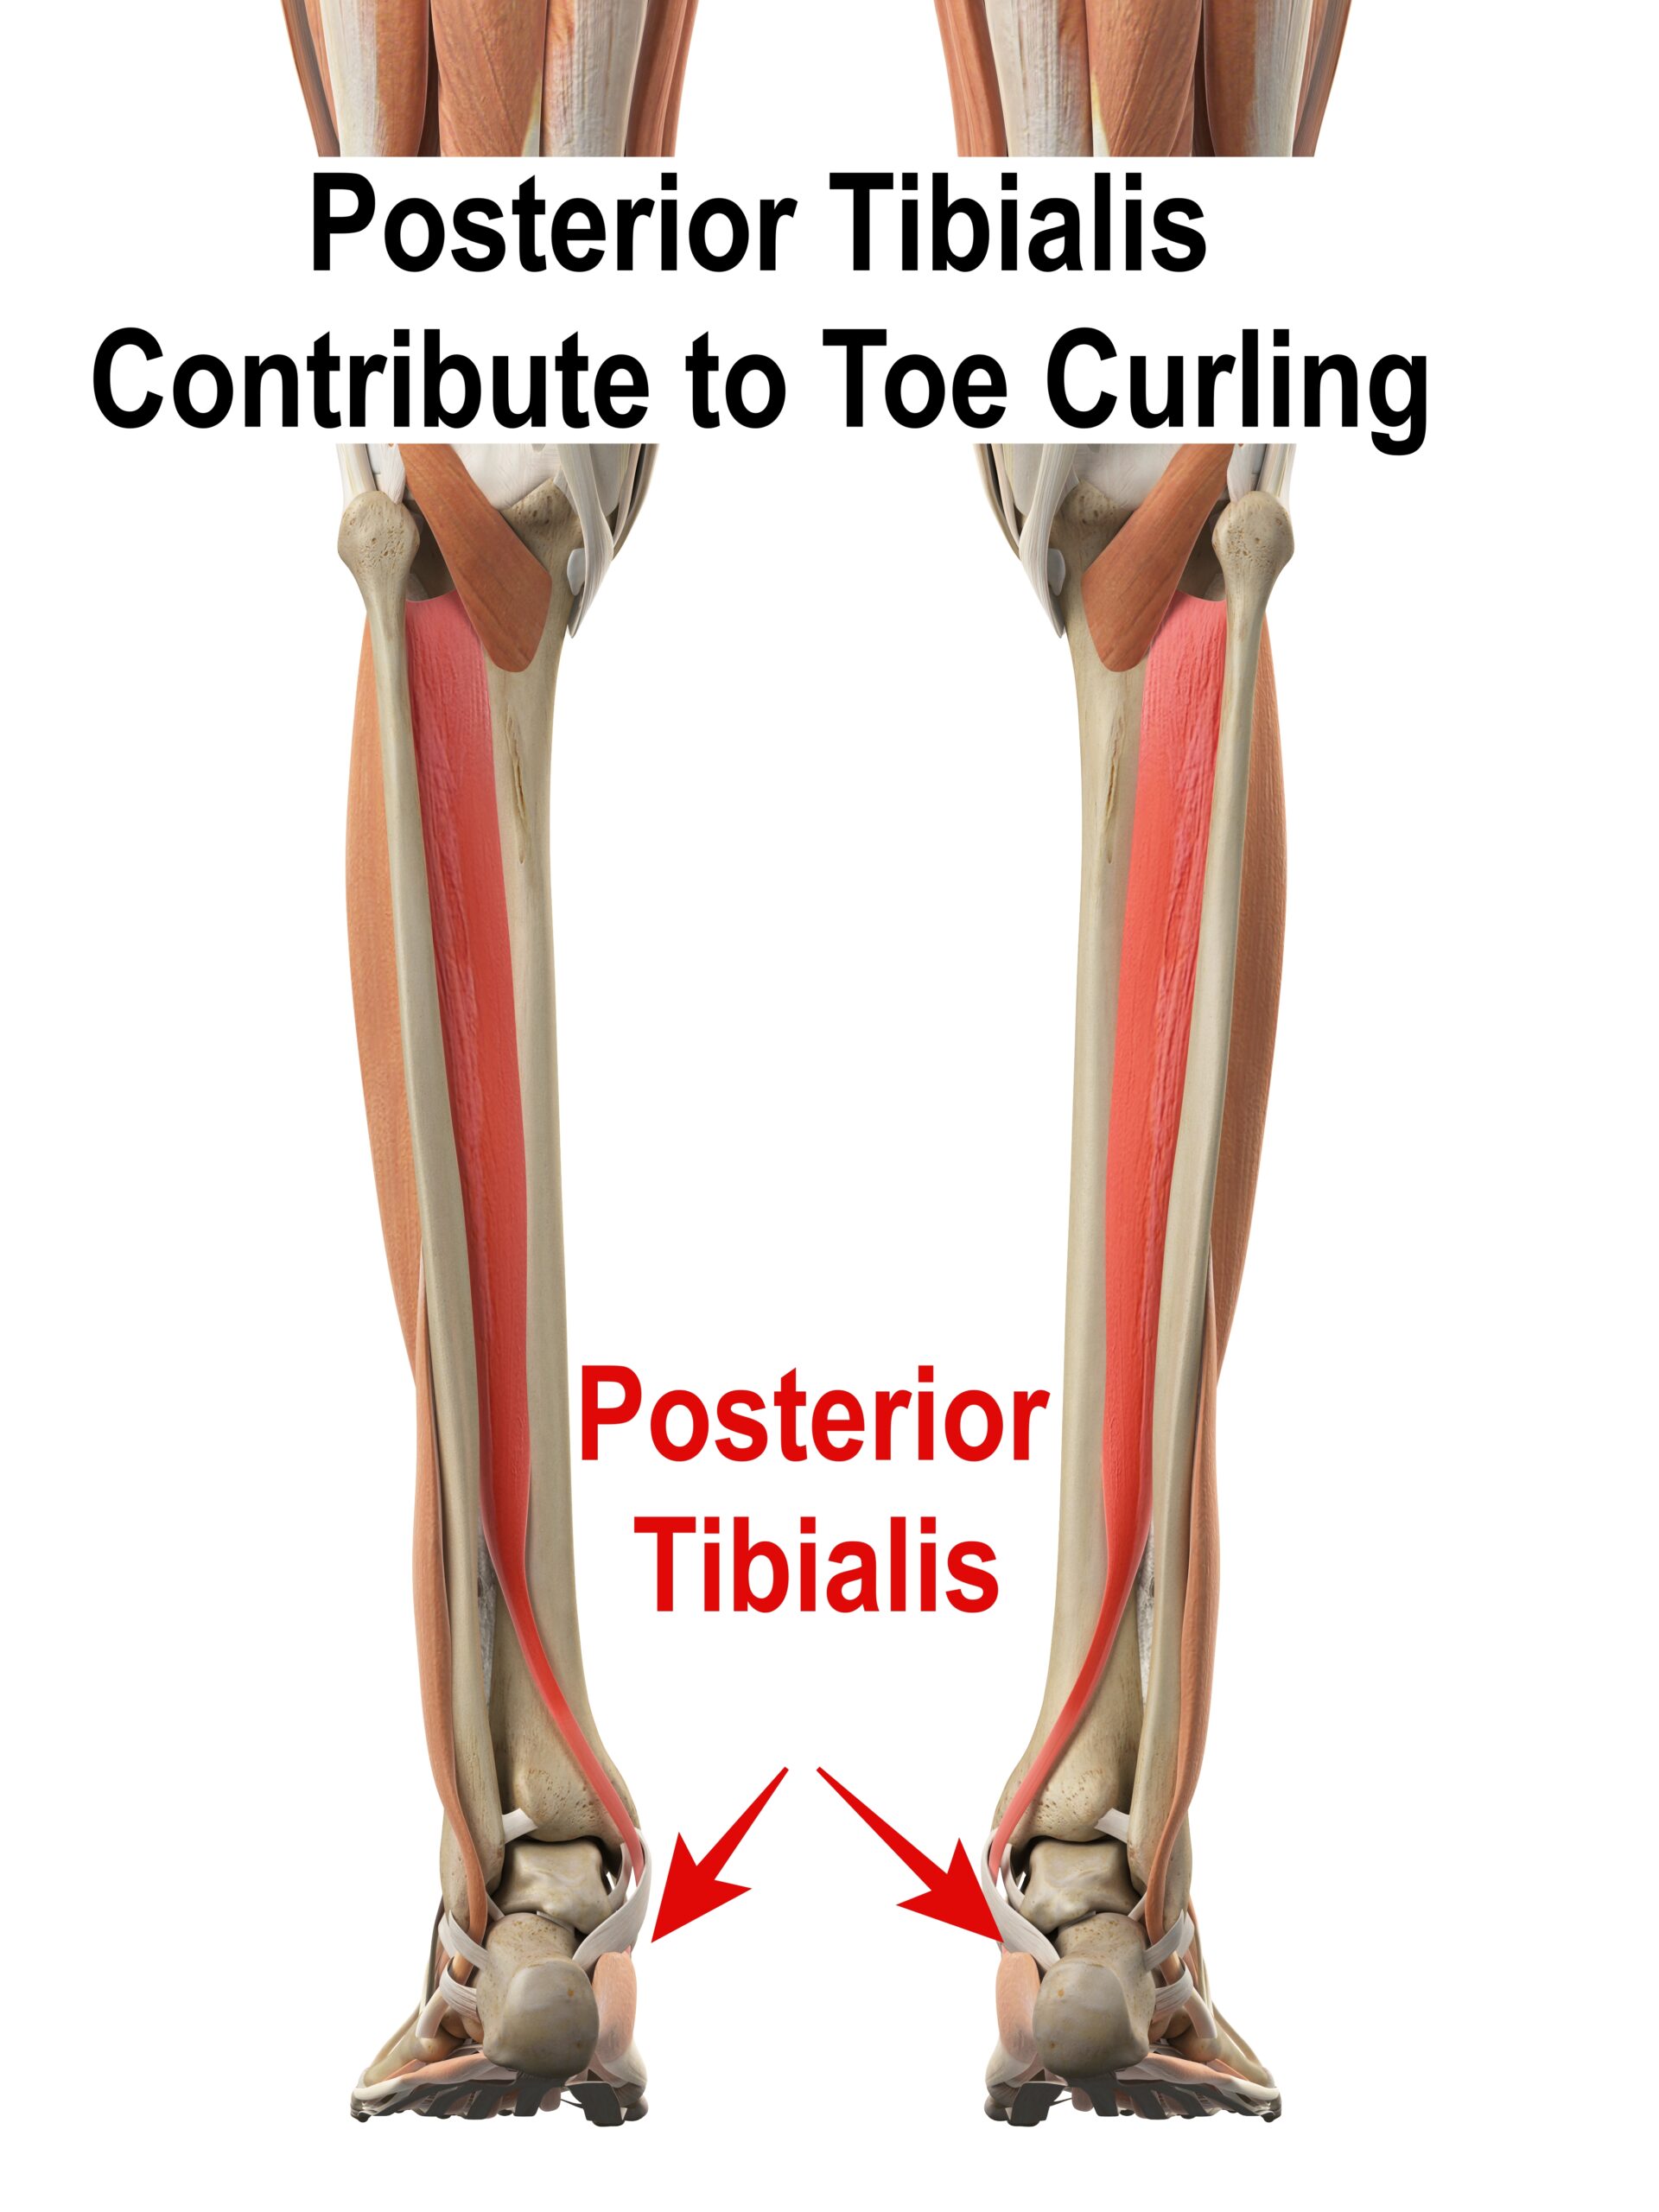 vector image of the posterior tibialis